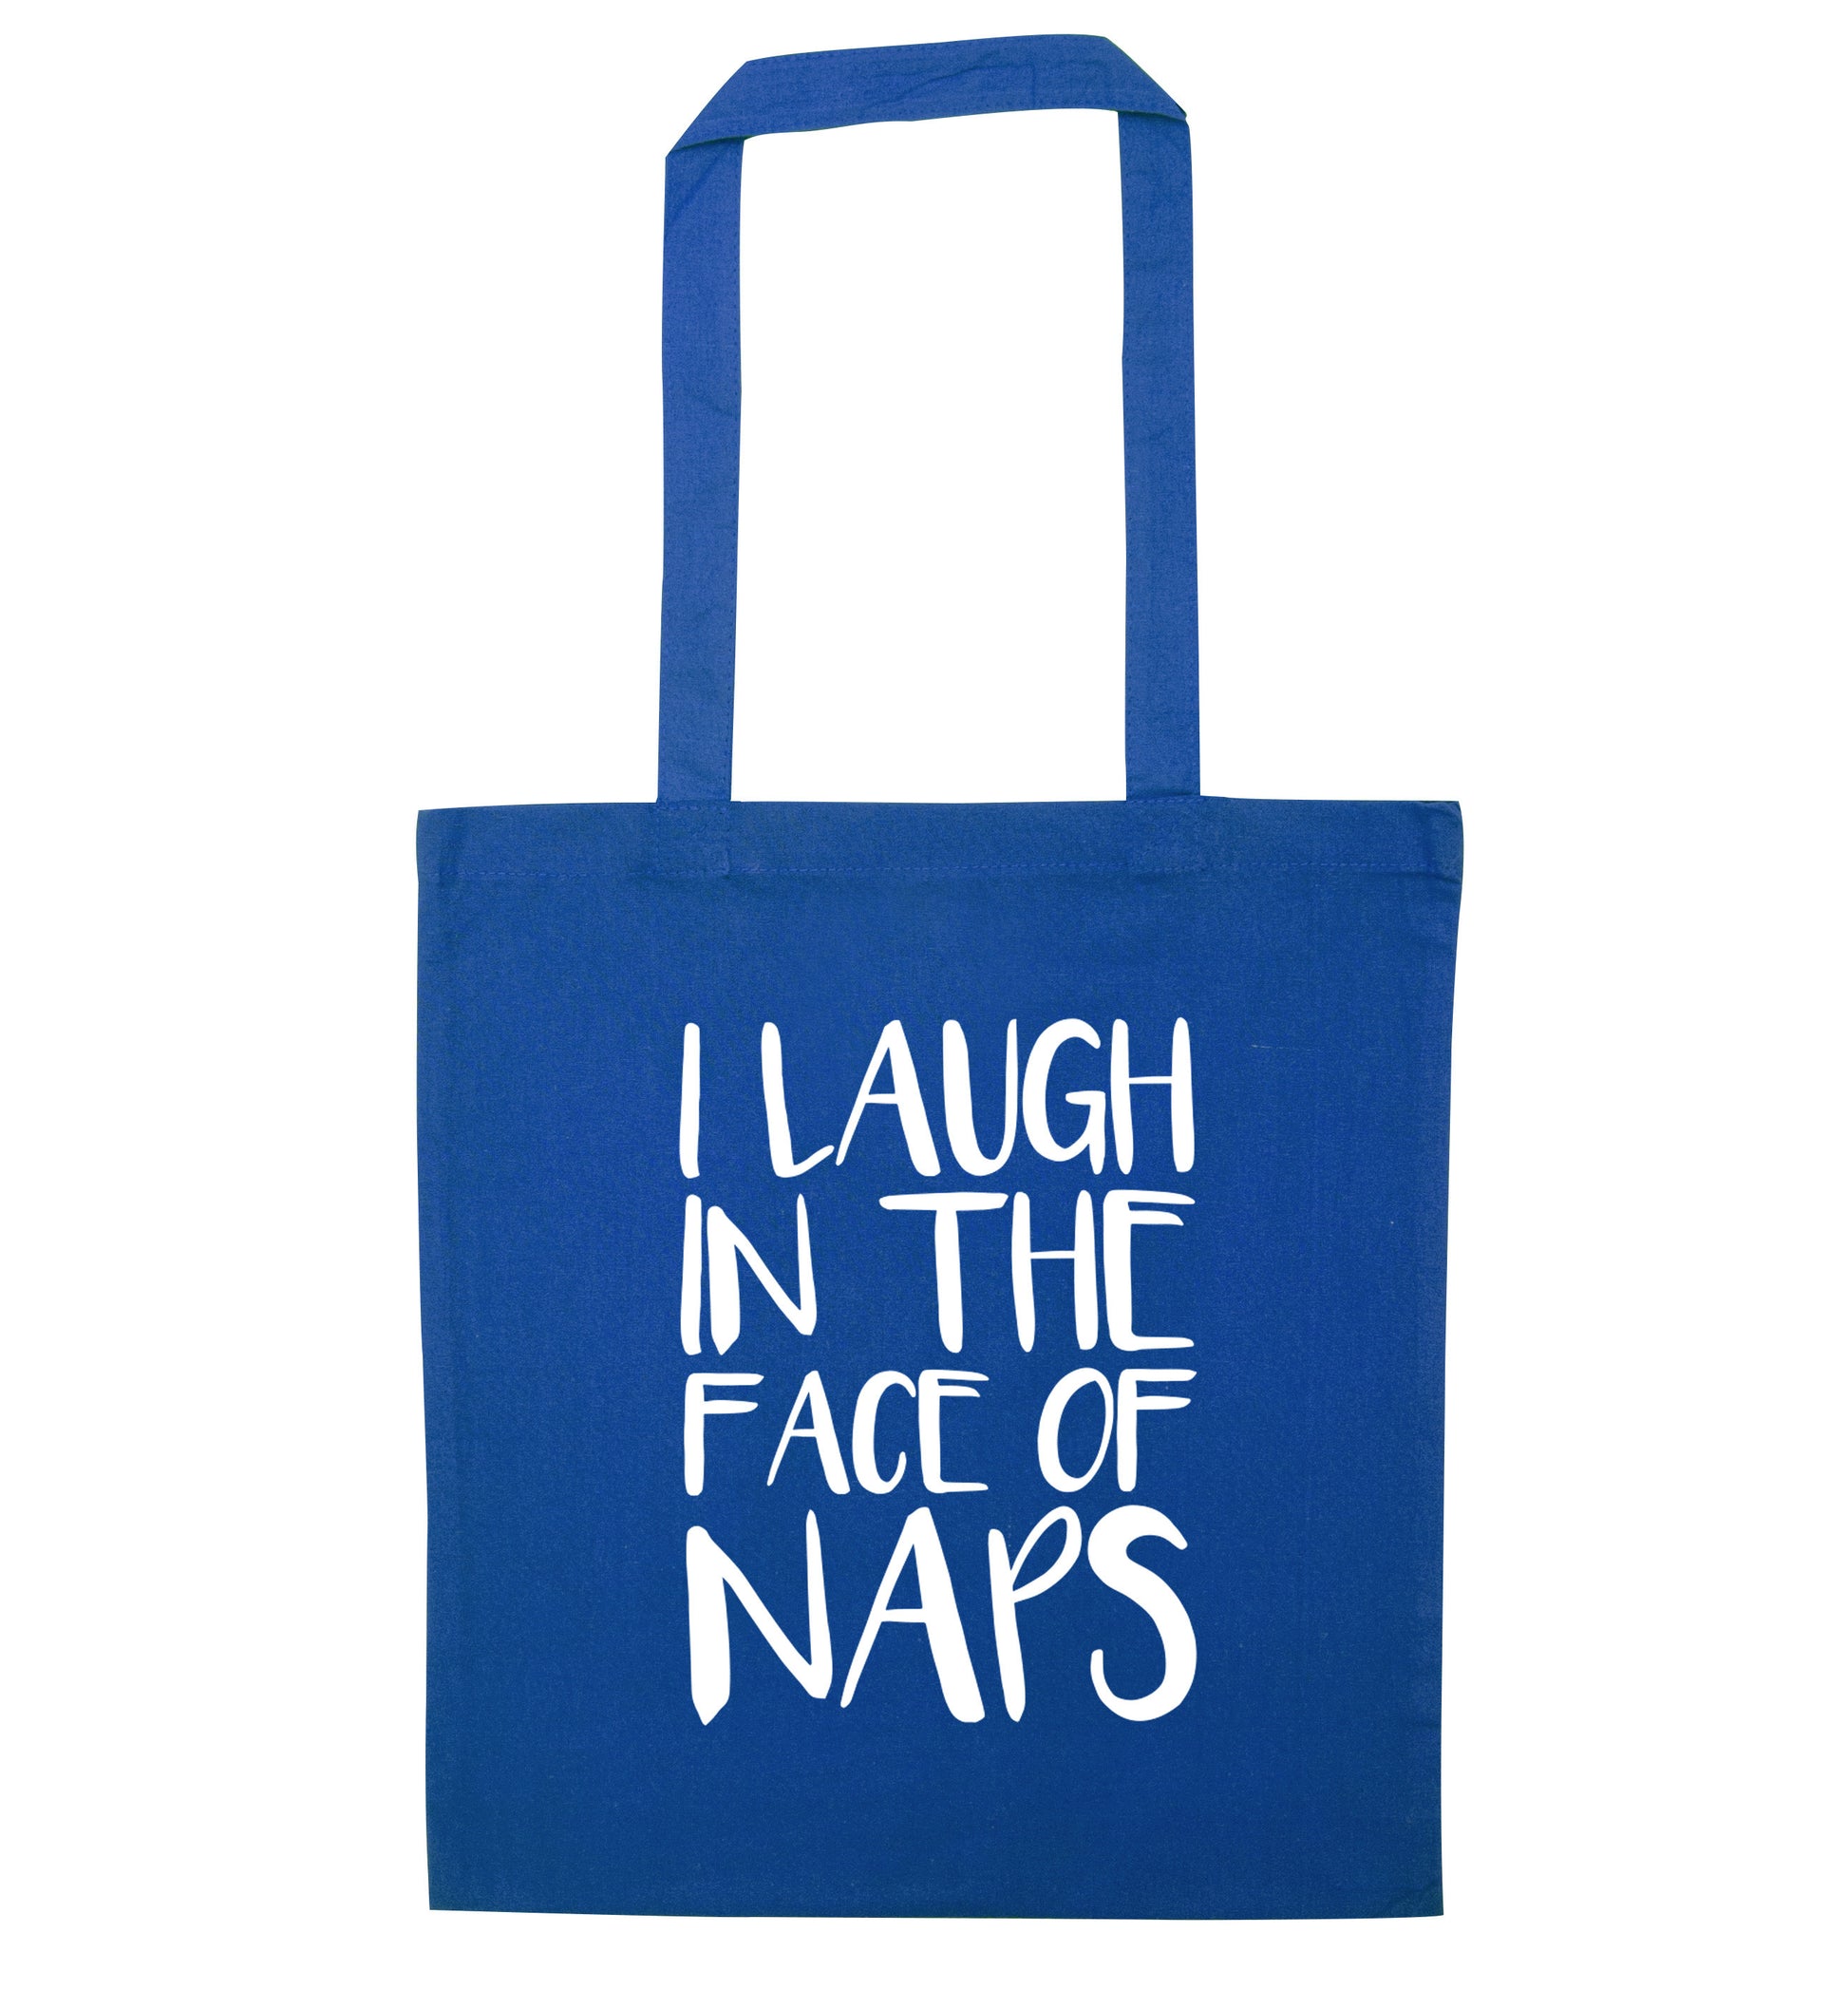 I laugh in the face of naps blue tote bag